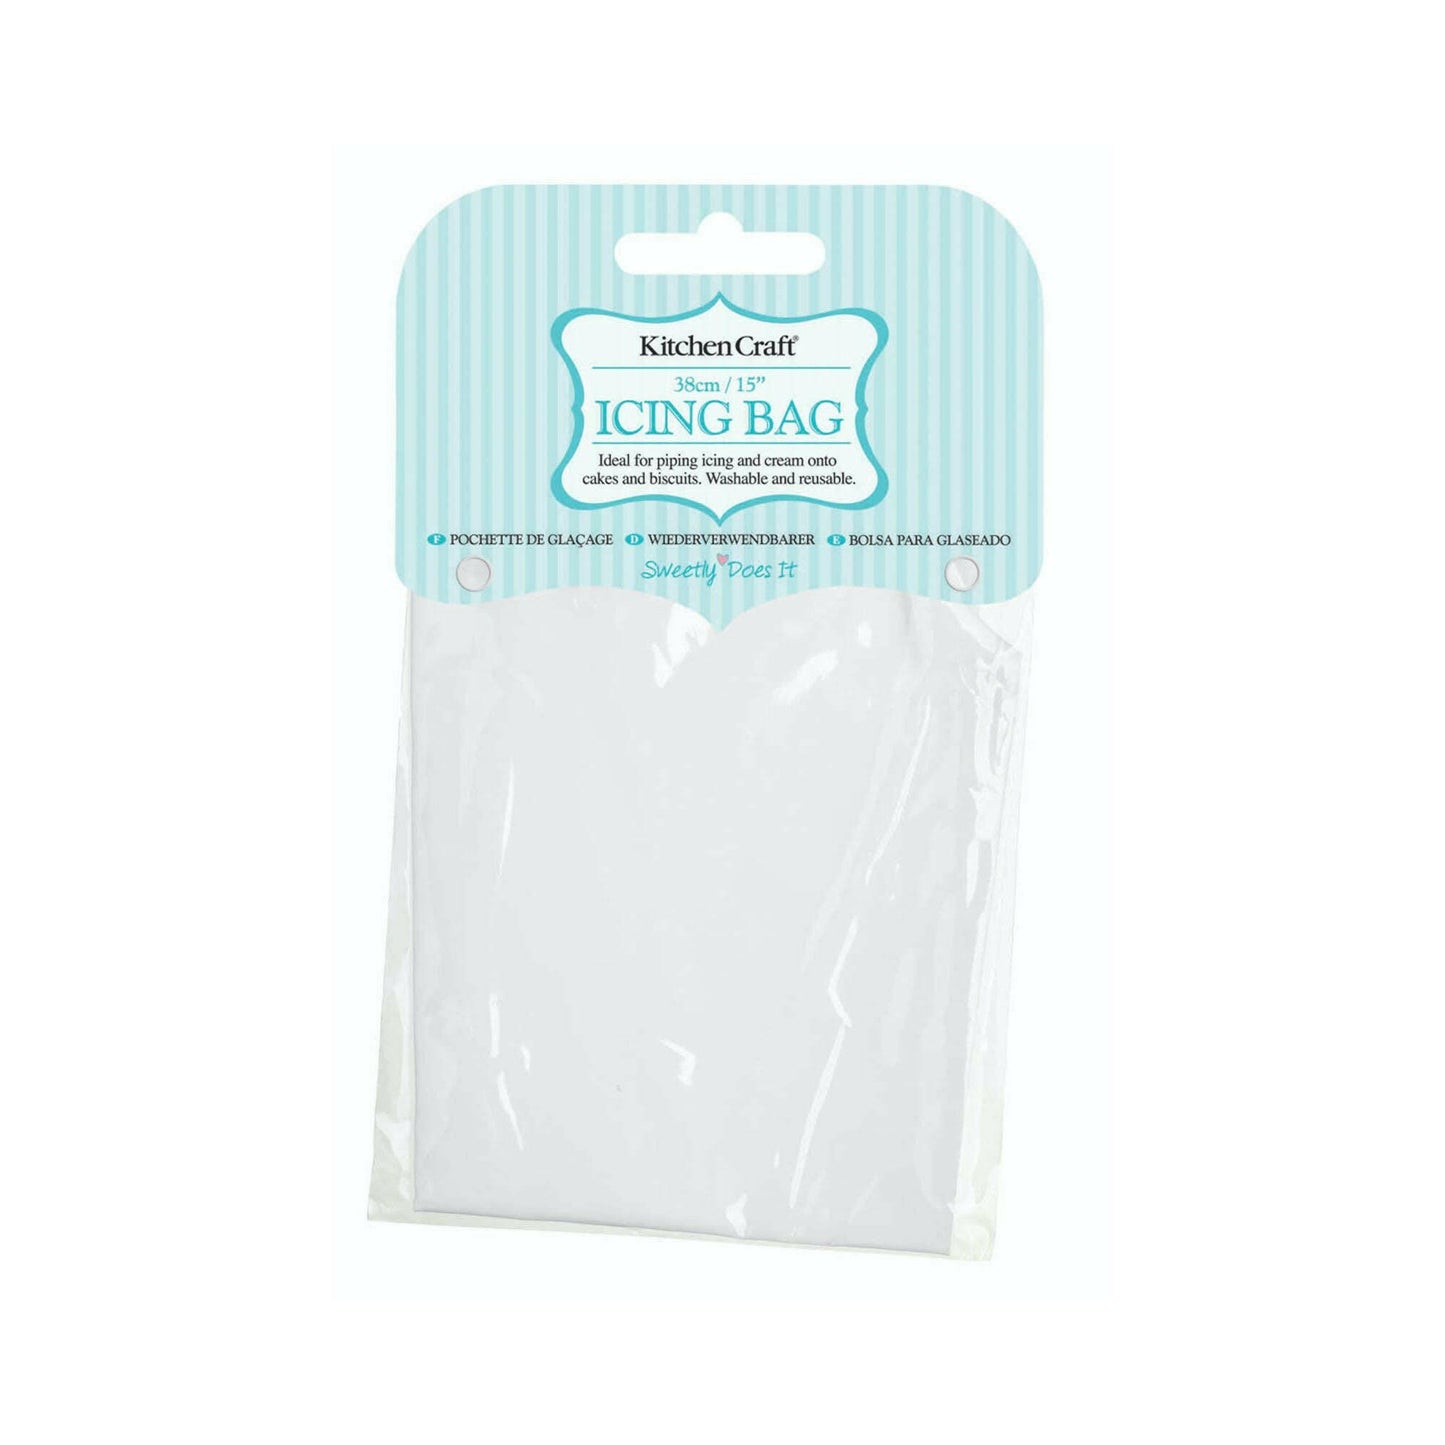 Sweetly Does It Icing Bag 38cm